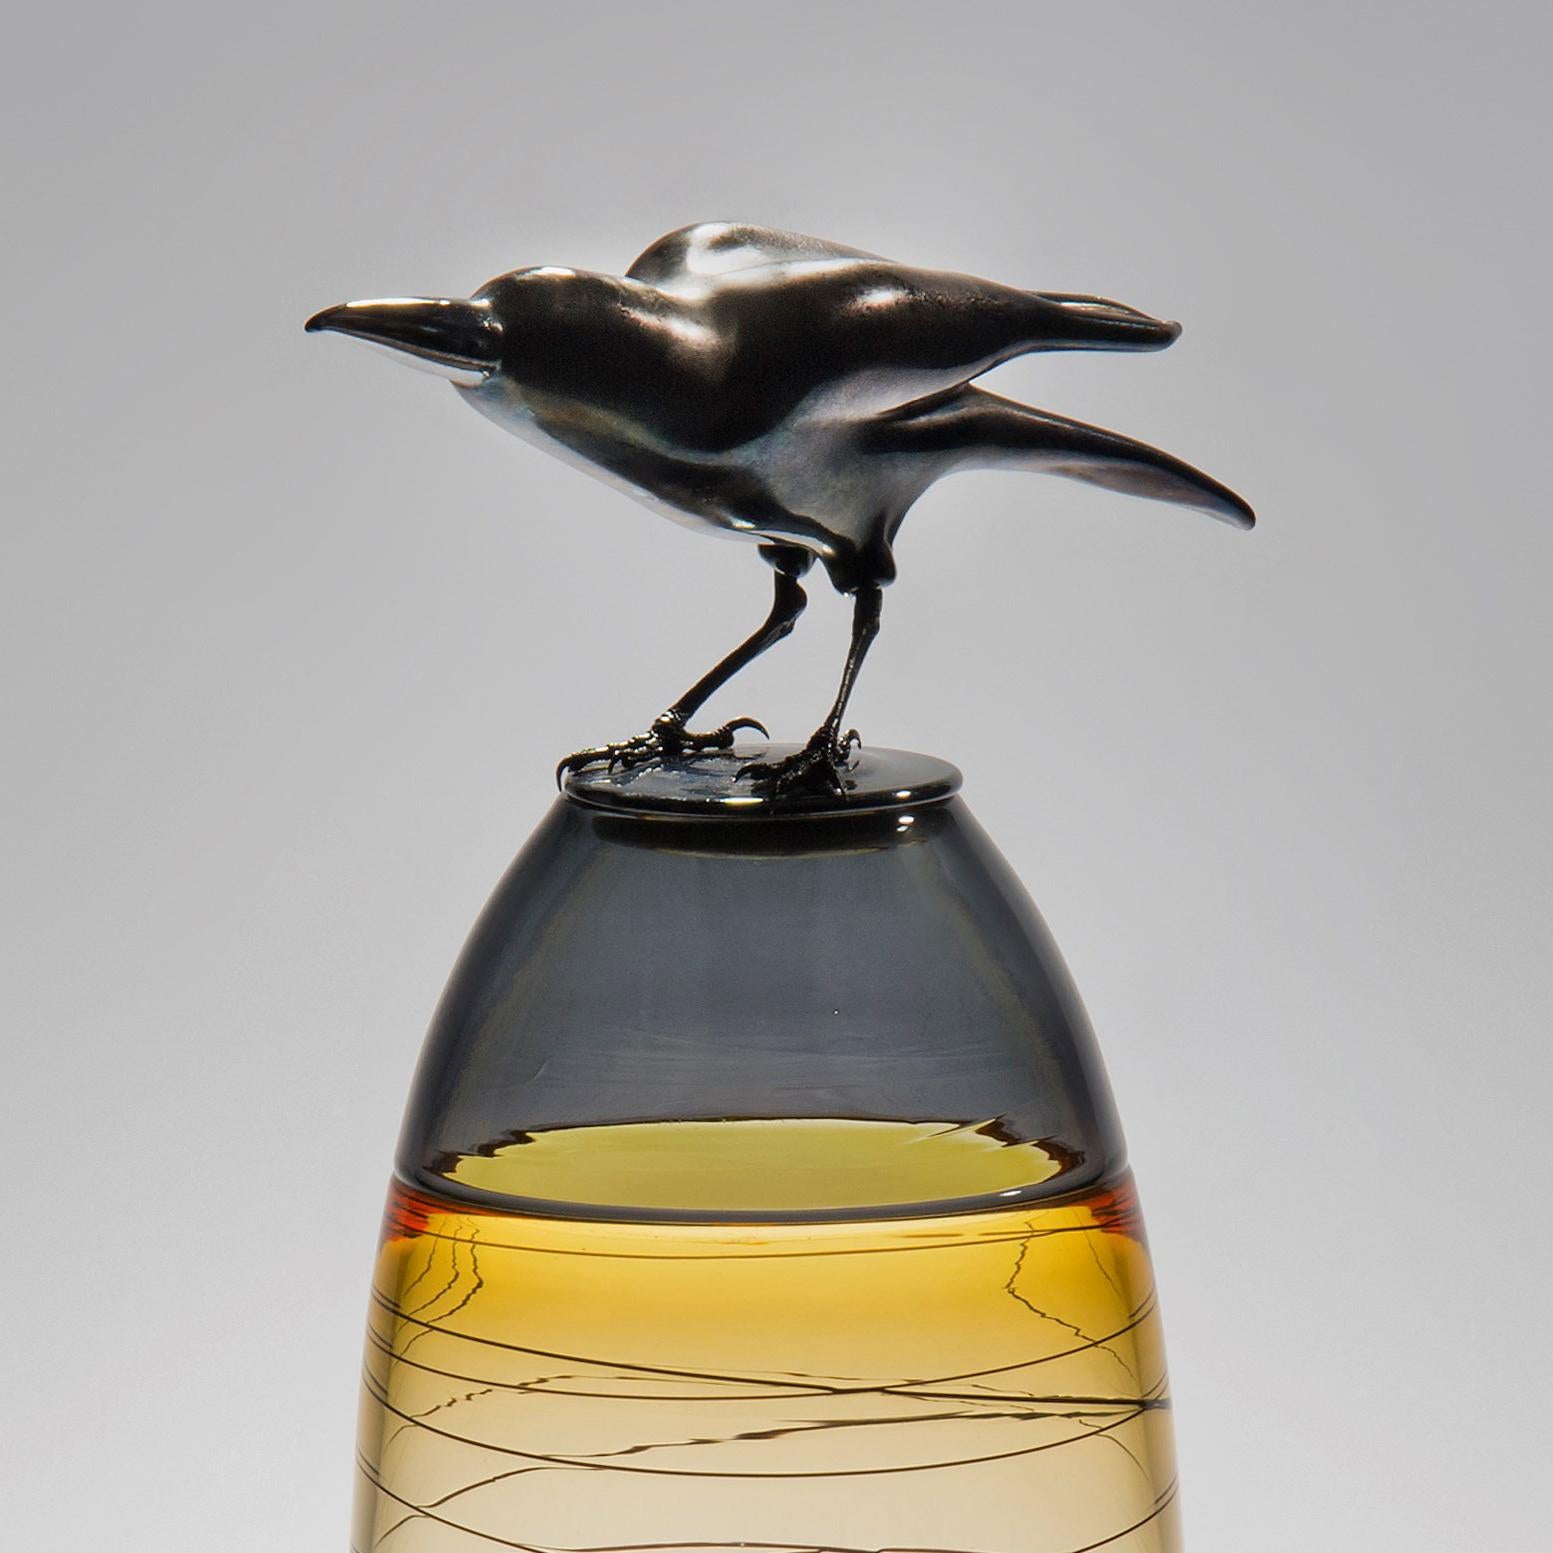 Organic Modern Take off, a Unique Glass Sculptural Vase with Black Crow by Julie Johnson